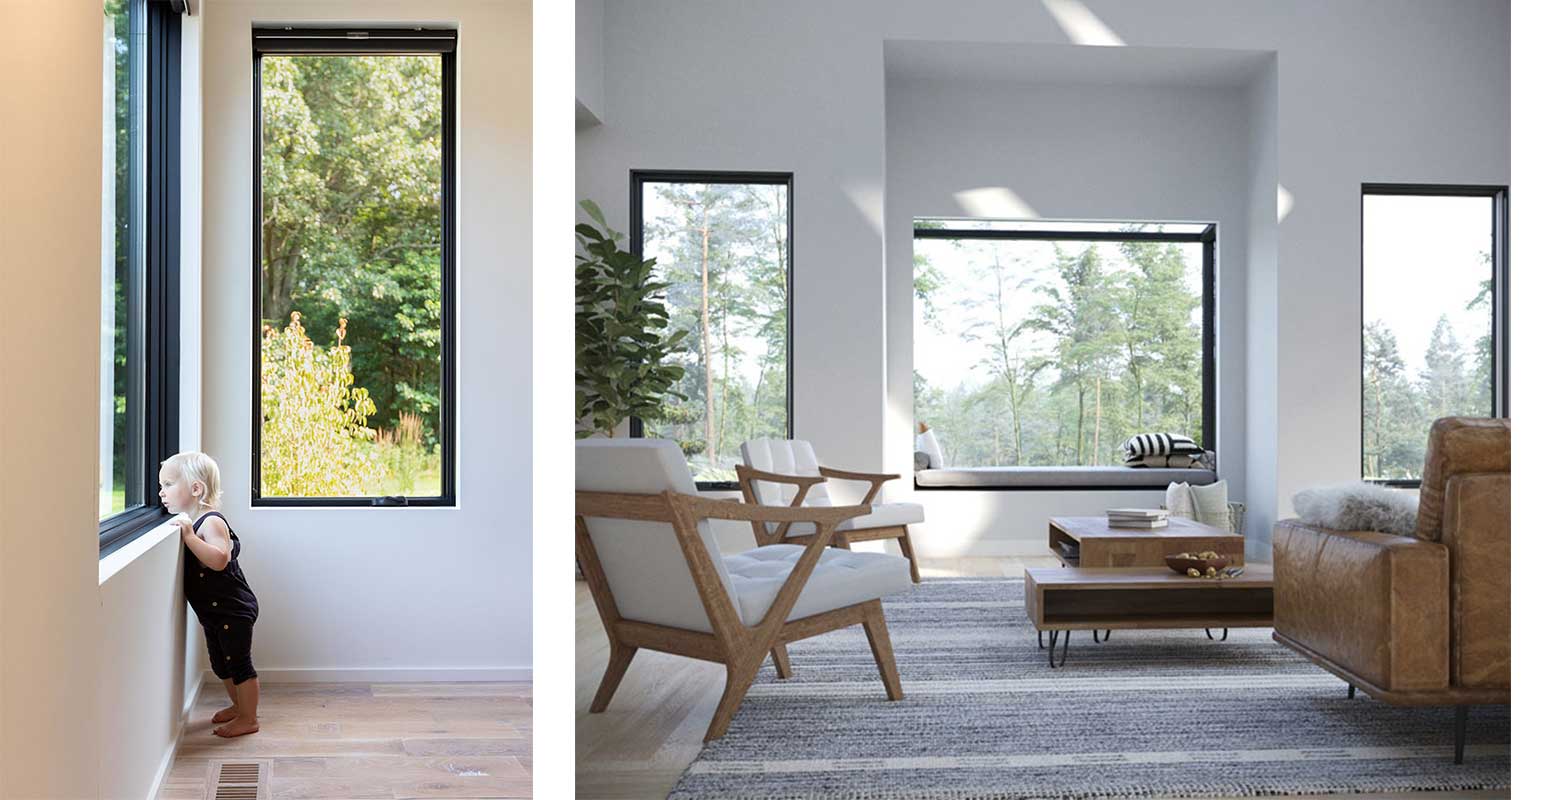 Marvin Skycove in a modern living room and A toddler looking out a Marvin Elevate casement window to a view of the outdoors.